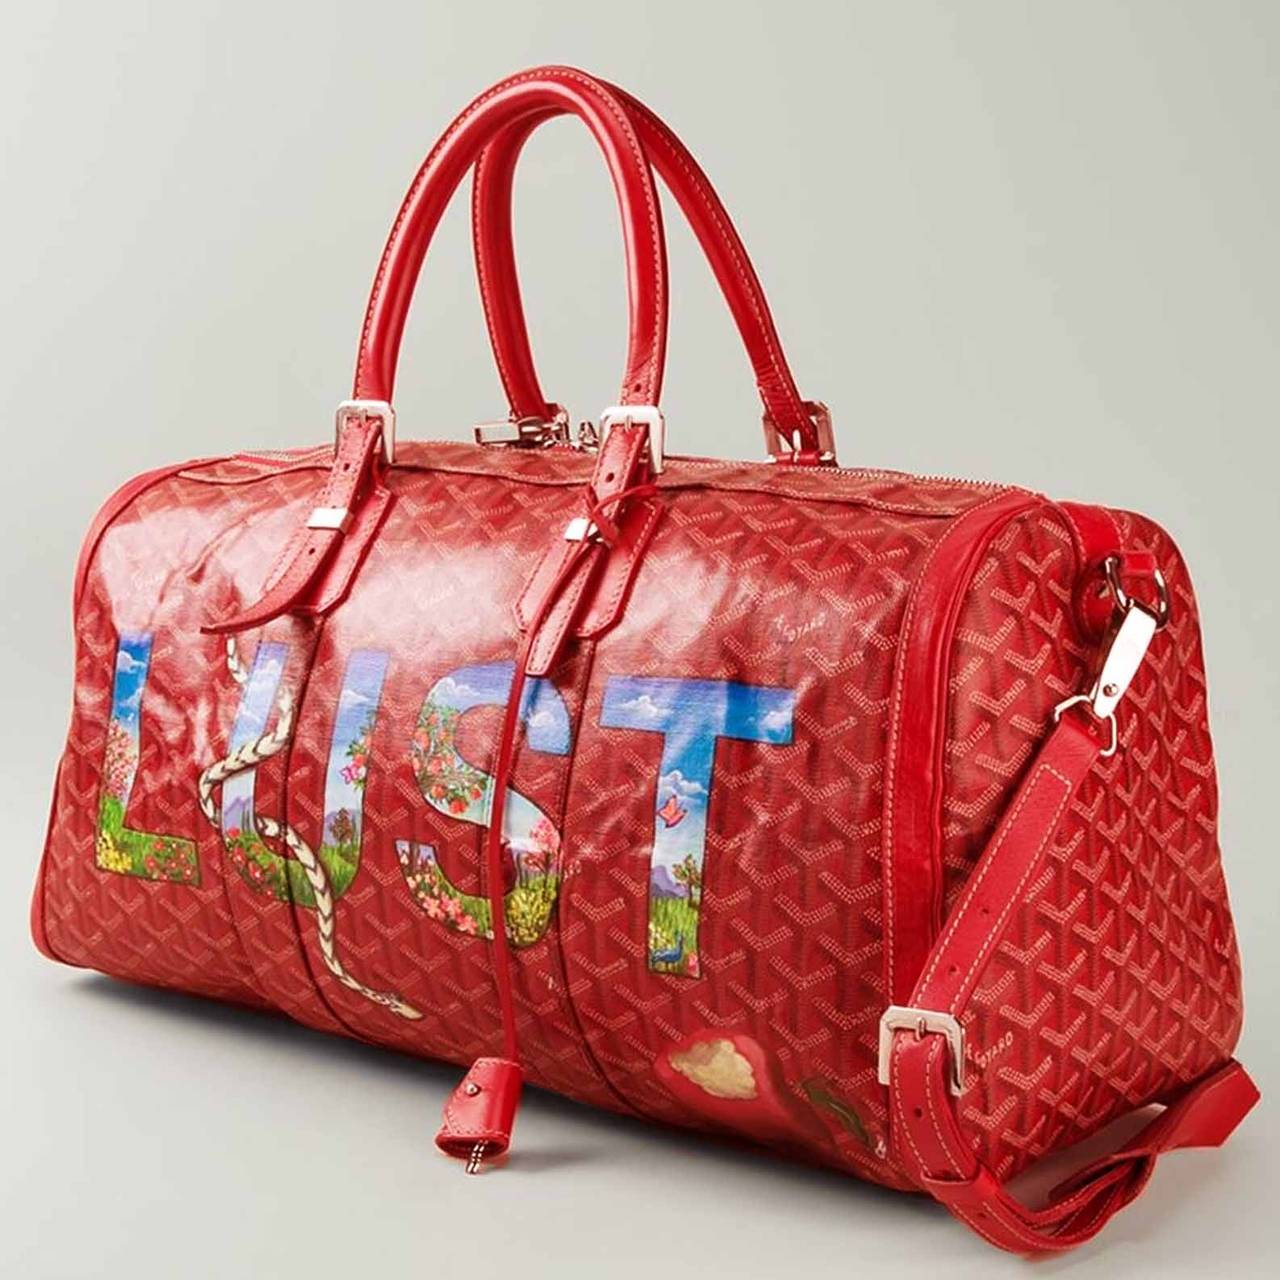 Goyard Hand Painted Red Bag For Sale at 